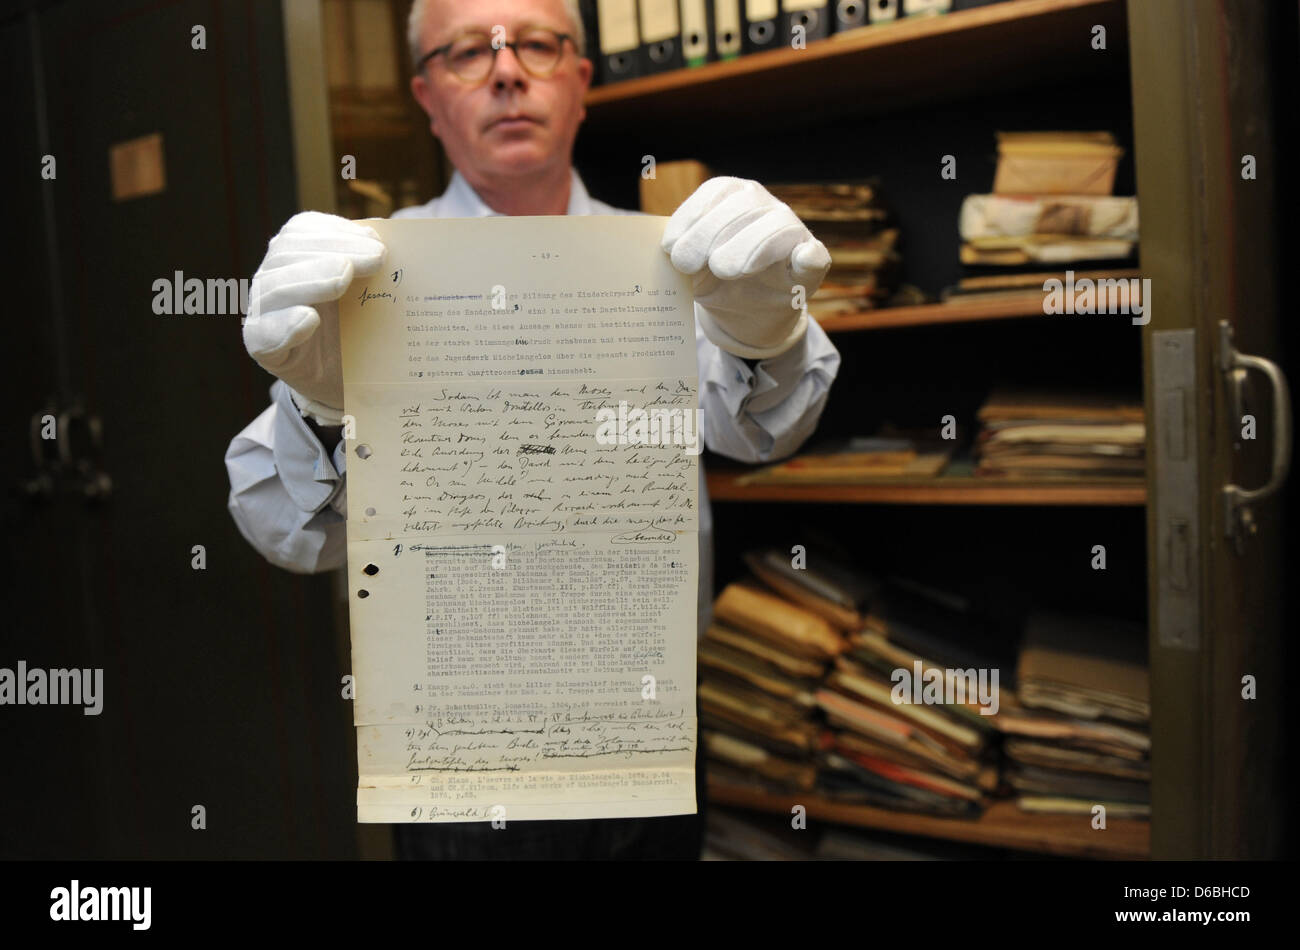 Art historian Stephan Klingen from the Central Institute of Art History holds a missing page believed to be from the habilitation work on artist Michelangelo by famed art historian Erwin Panofsky (1892-1968) in Munich, Germany, 31 August 2012. Klingen found the page in an old NSDAP safe in the basement of the building. The institute is located in a former NSDAP administration build Stock Photo